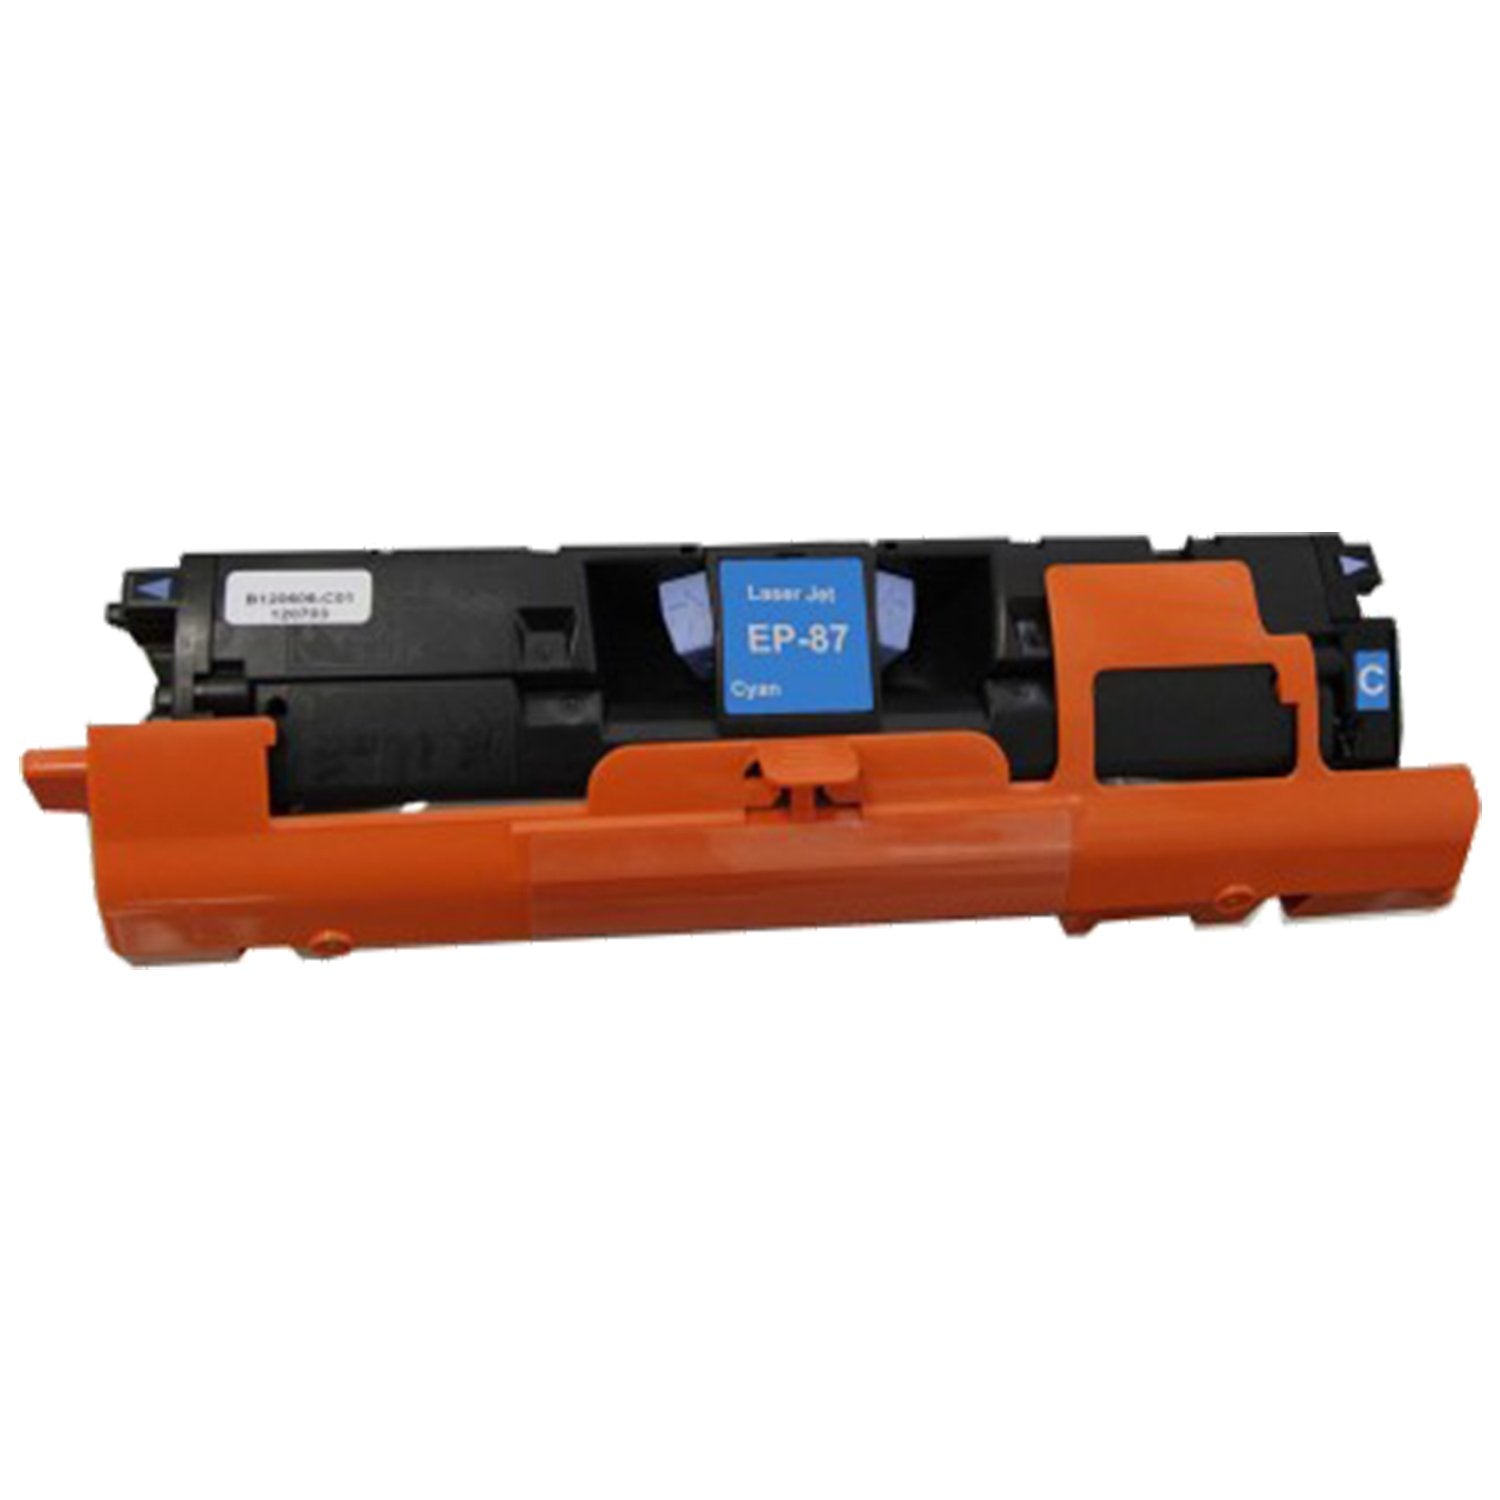 Absolute Toner Compatible 7432A005AA Canon EP-87 Cyan Toner Cartridge | Absolute Toner Canon Toner Cartridges